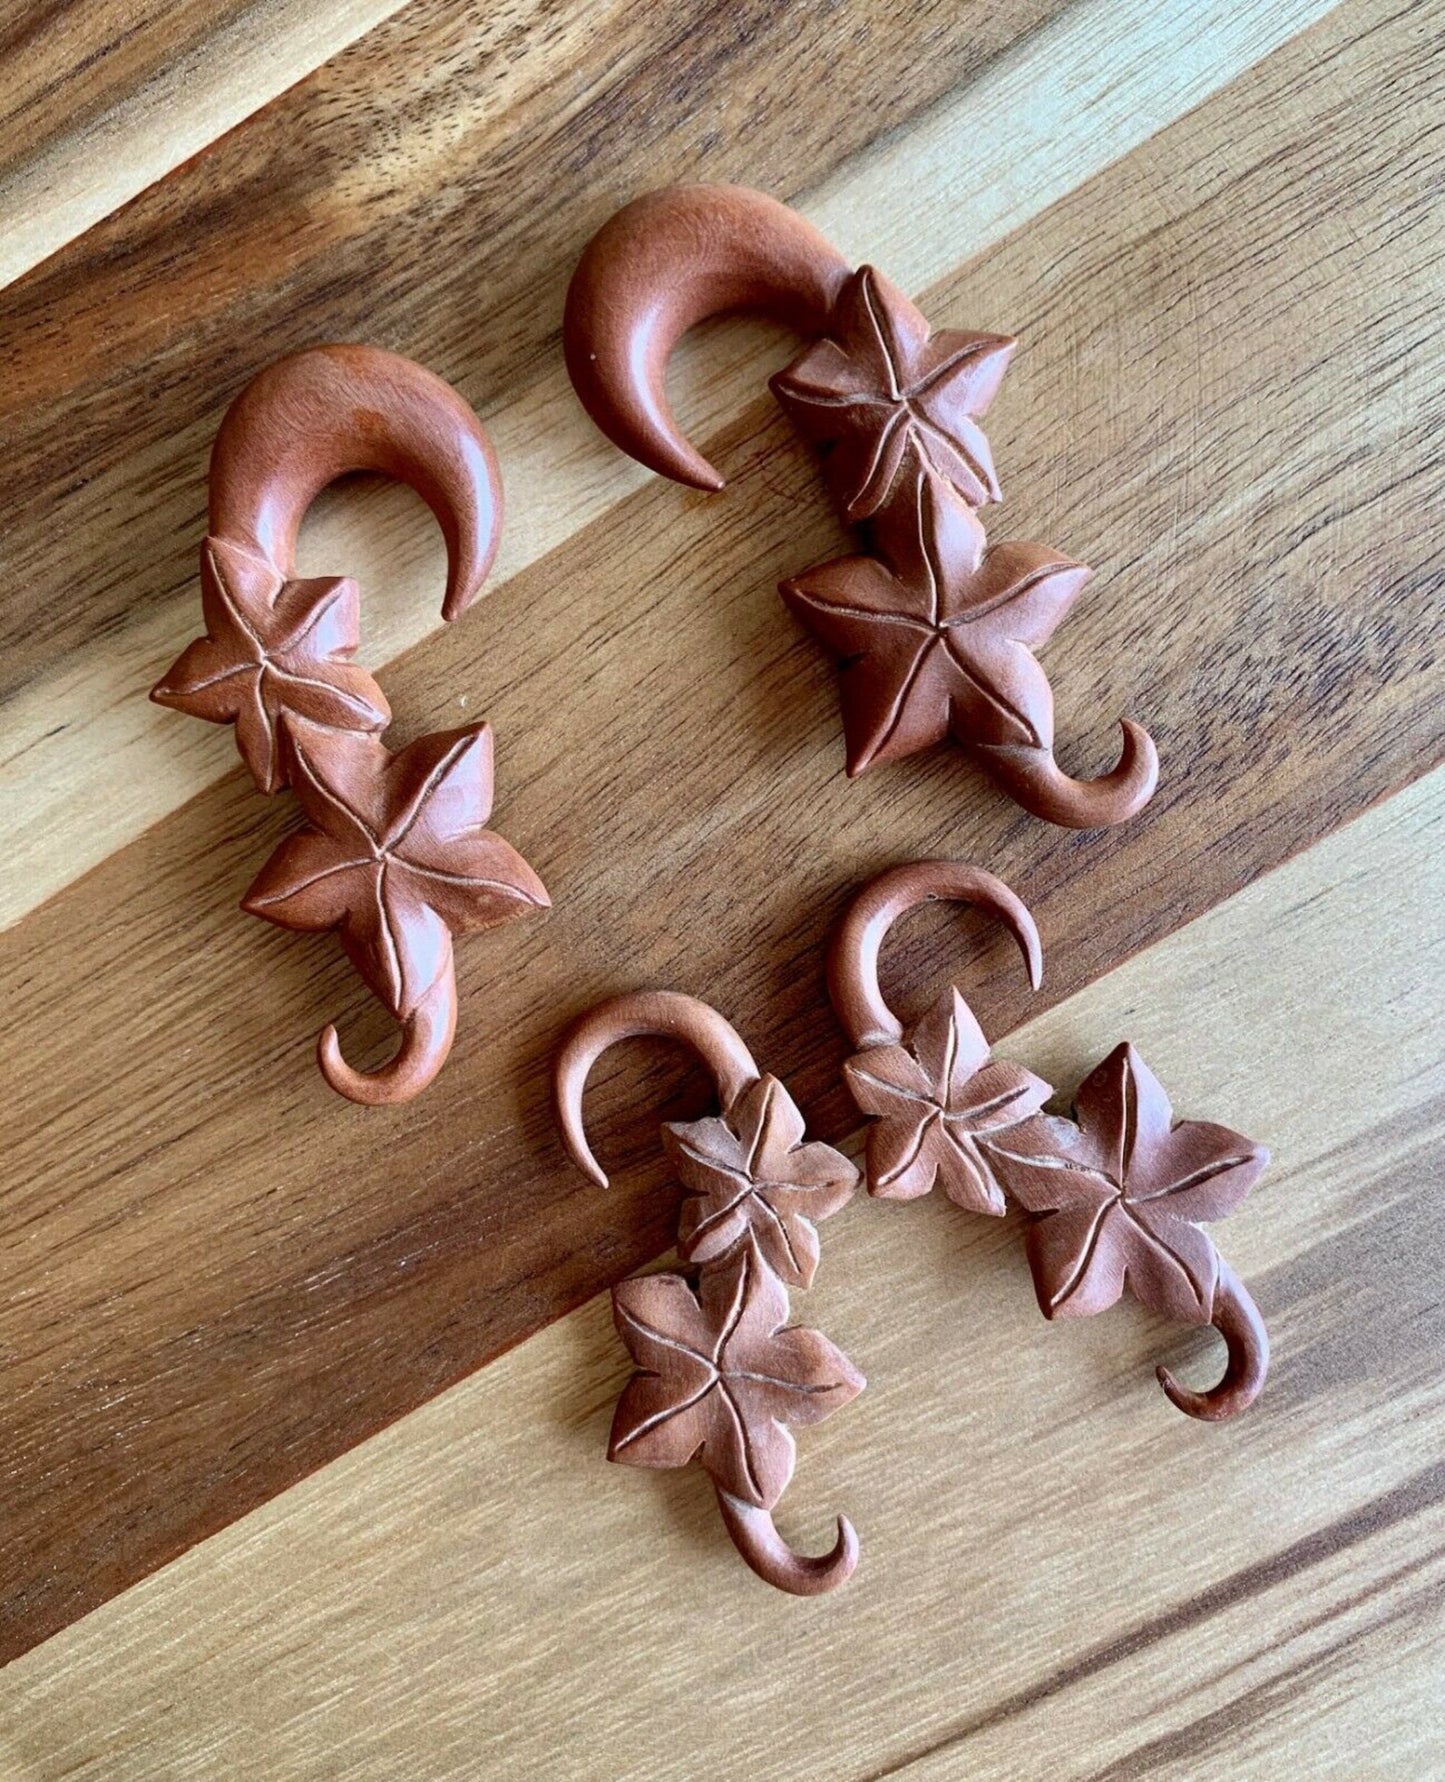 PAIR of Unique Organic Leaves Saba Wood Expanding Tapers - Gauges 6g (4mm) up to 7/16" (11mm) available!